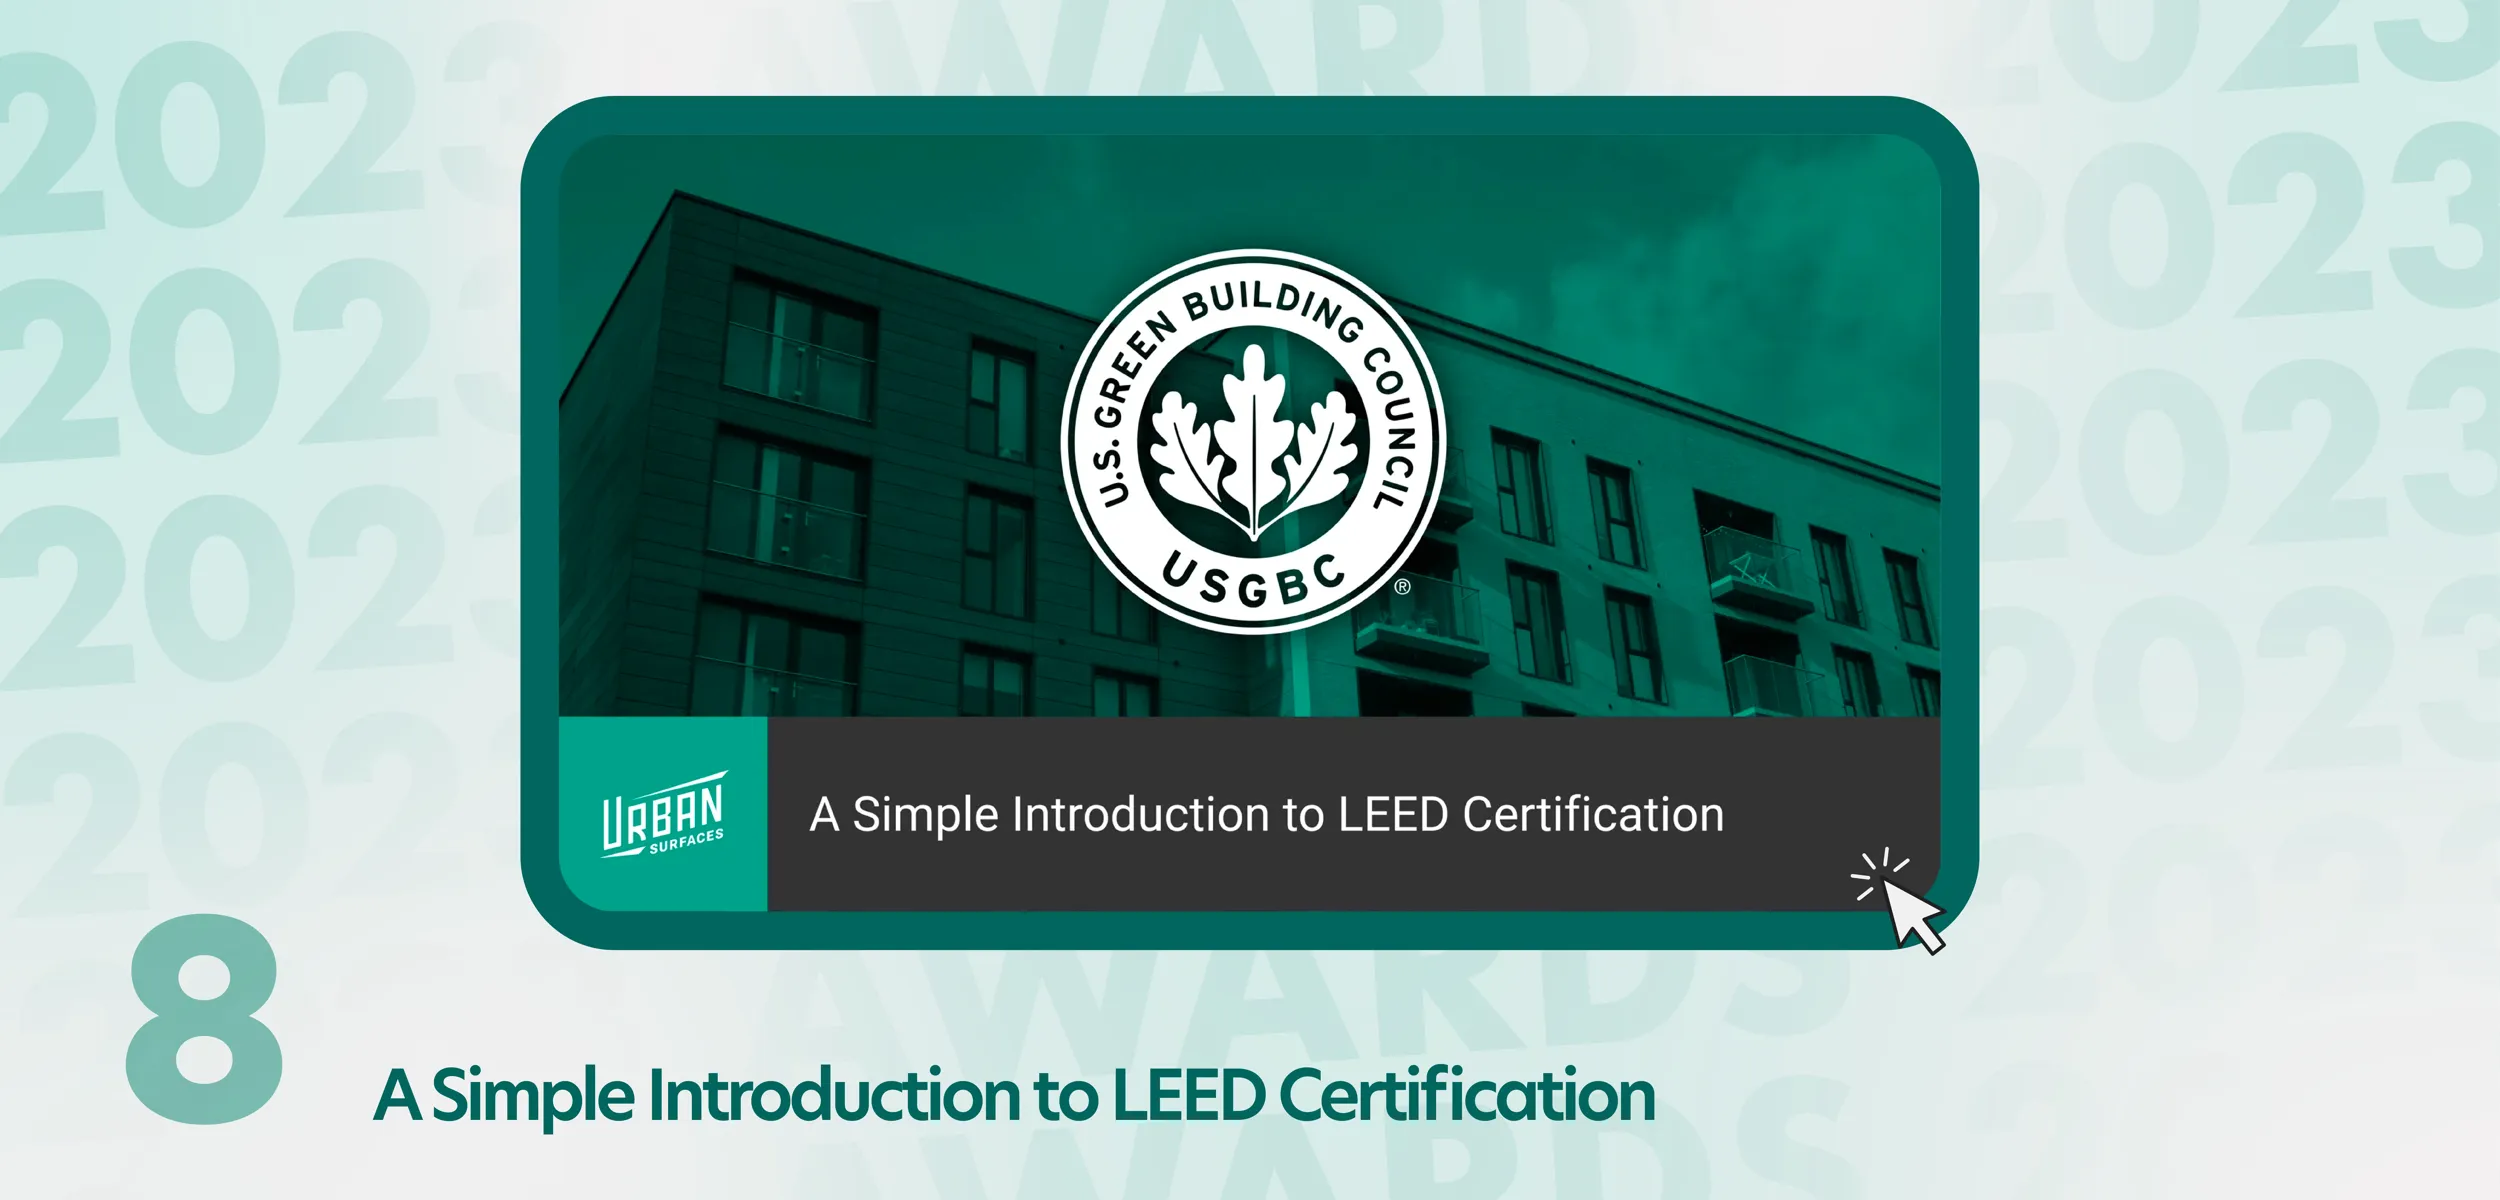 Large multifamily building with USGBC logo. Title: A Simple Introduction to LEED Certification.